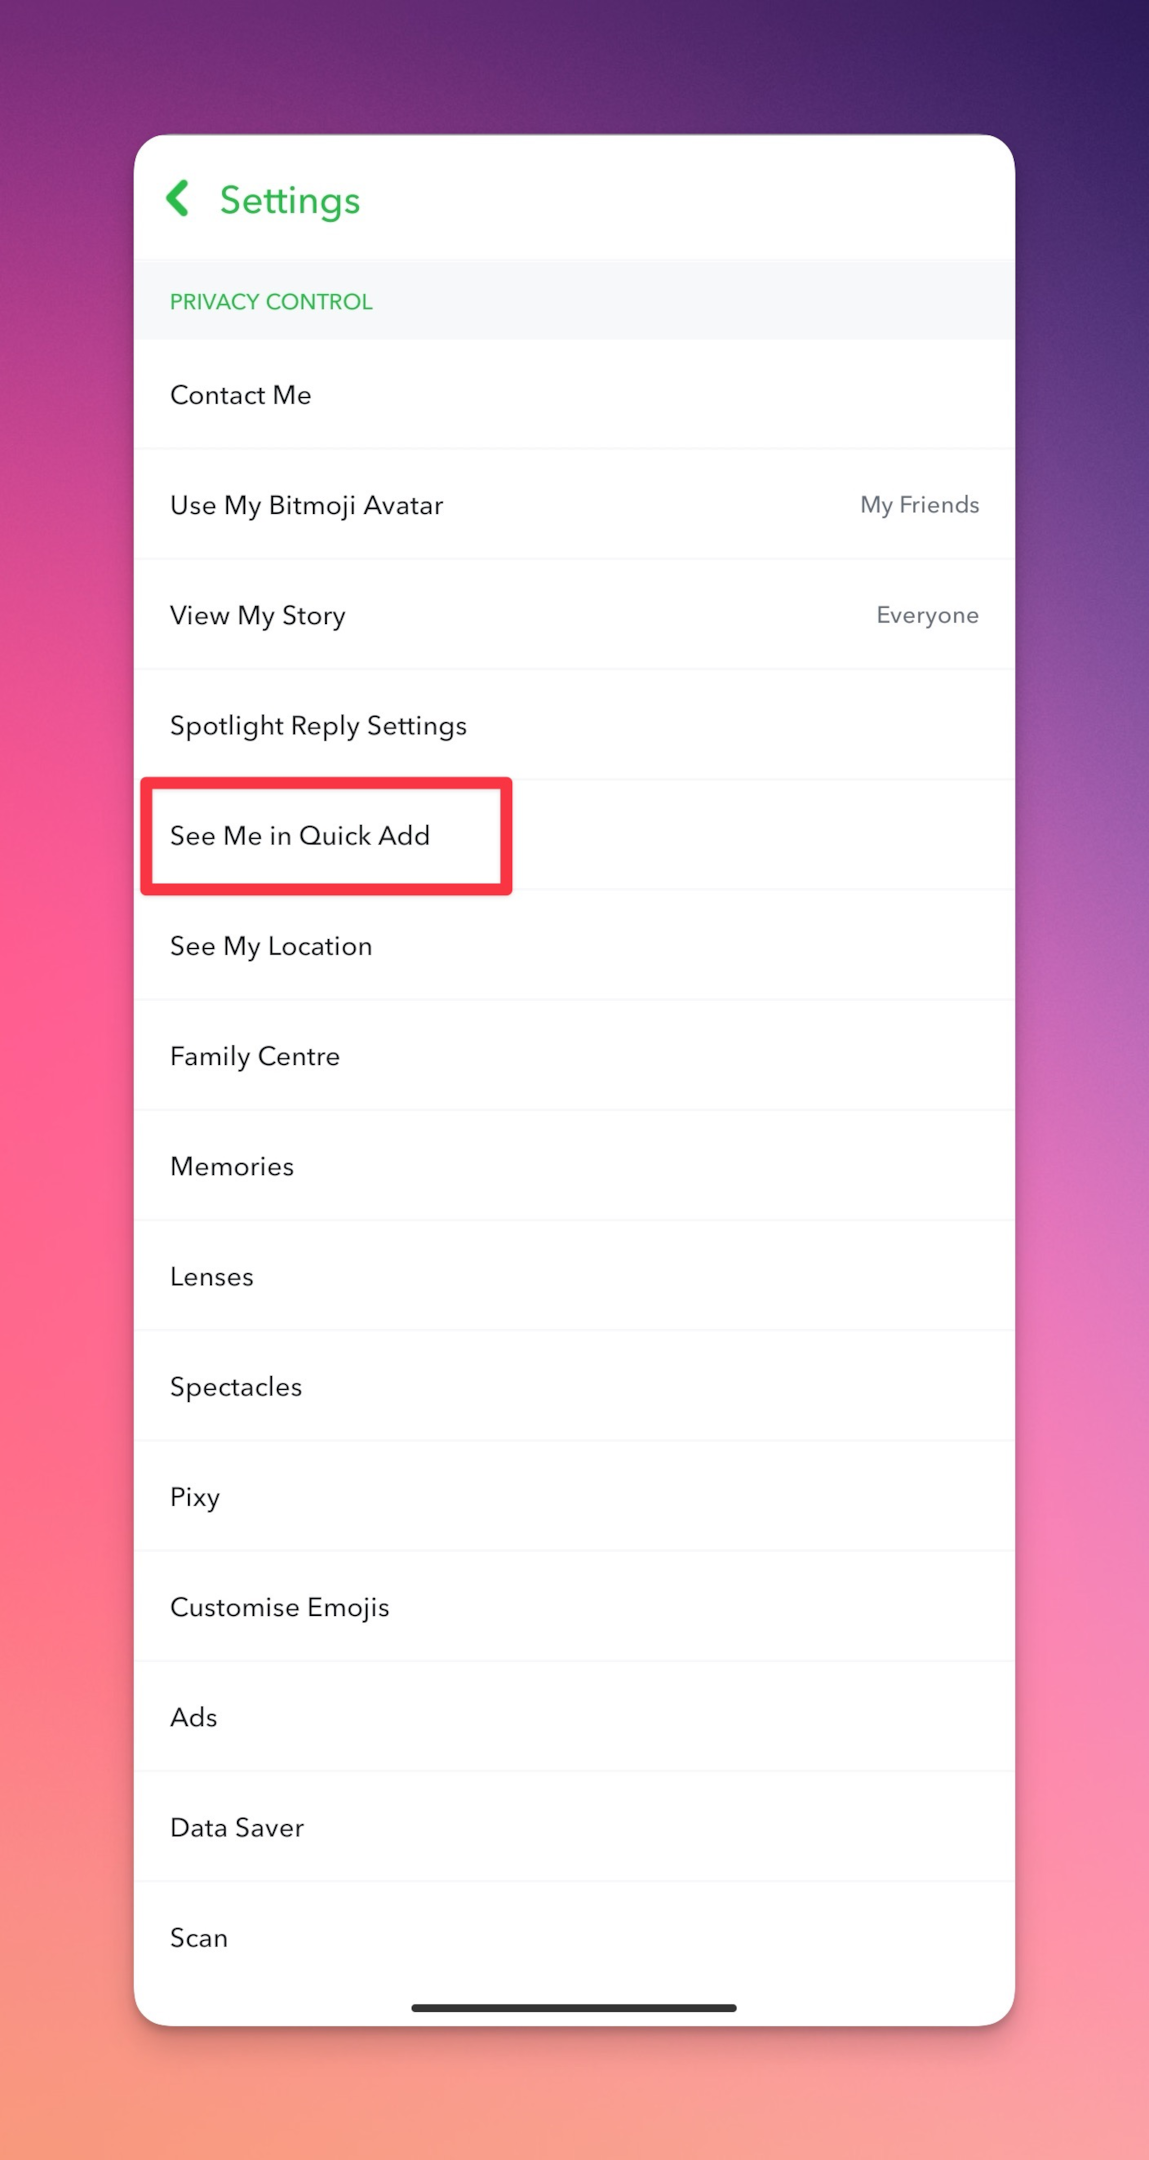 Remote.tools showing the privacy feature of "Show me in quick add" on Snapchat. If turned off, your profile will not be visible under Quick Add list for other users.